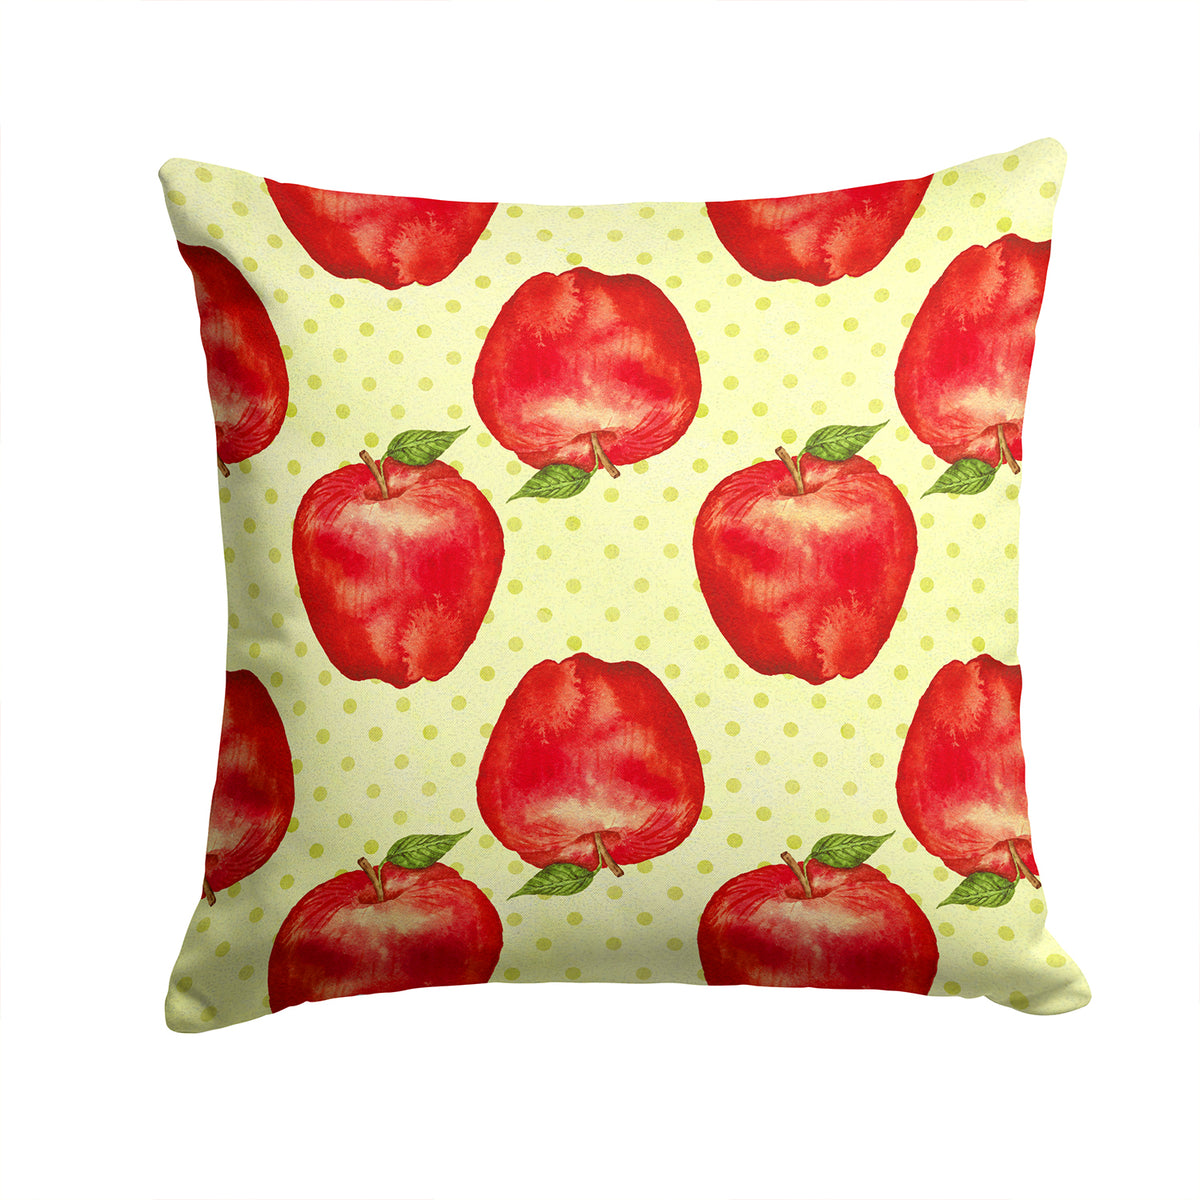 Watercolor Apples and Polkadots Fabric Decorative Pillow BB7516PW1414 - the-store.com